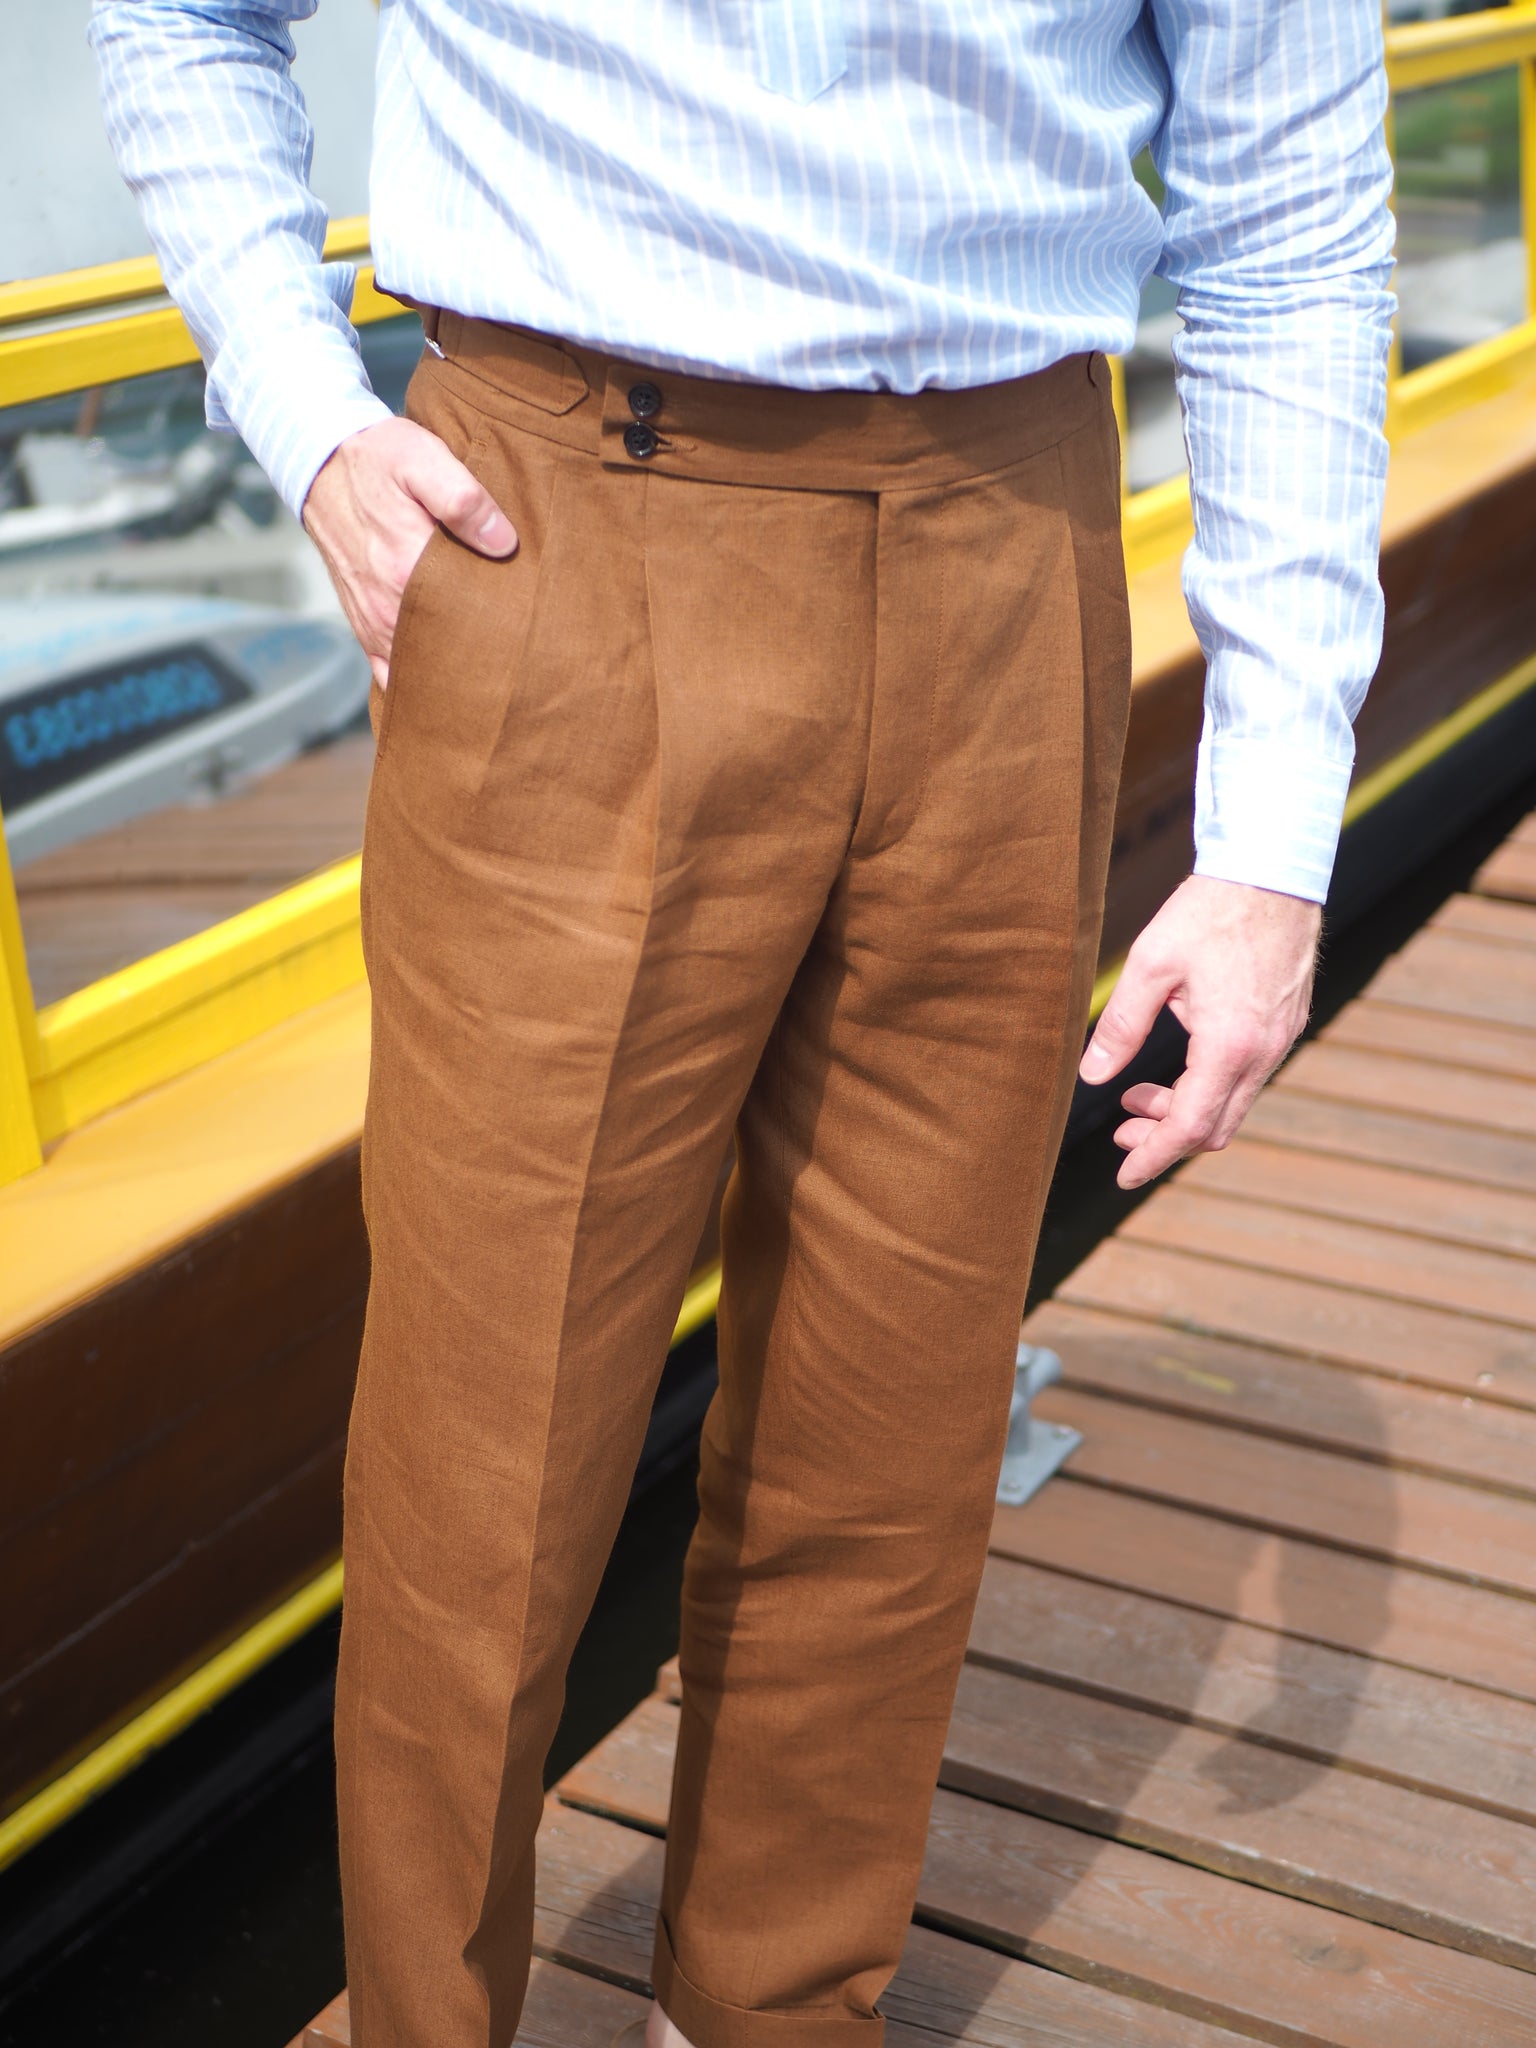 Men's Trousers - Buy Linen Trousers for Men Online with Upto 50